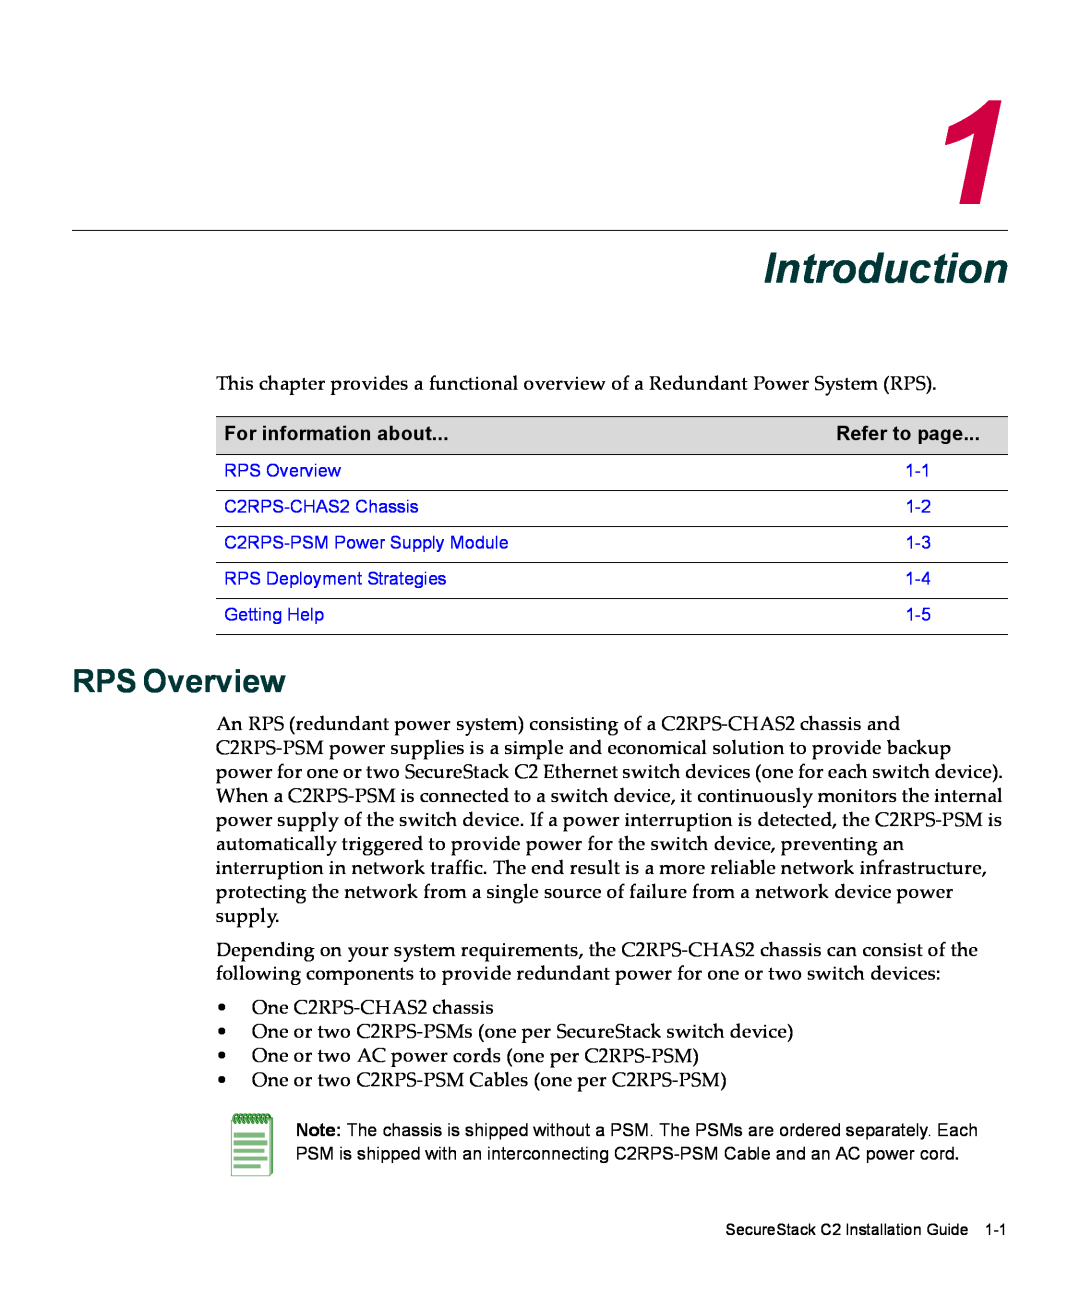 Enterasys Networks C2RPS-CHAS2 manual Introduction, RPS Overview, For information about, Refer to page 